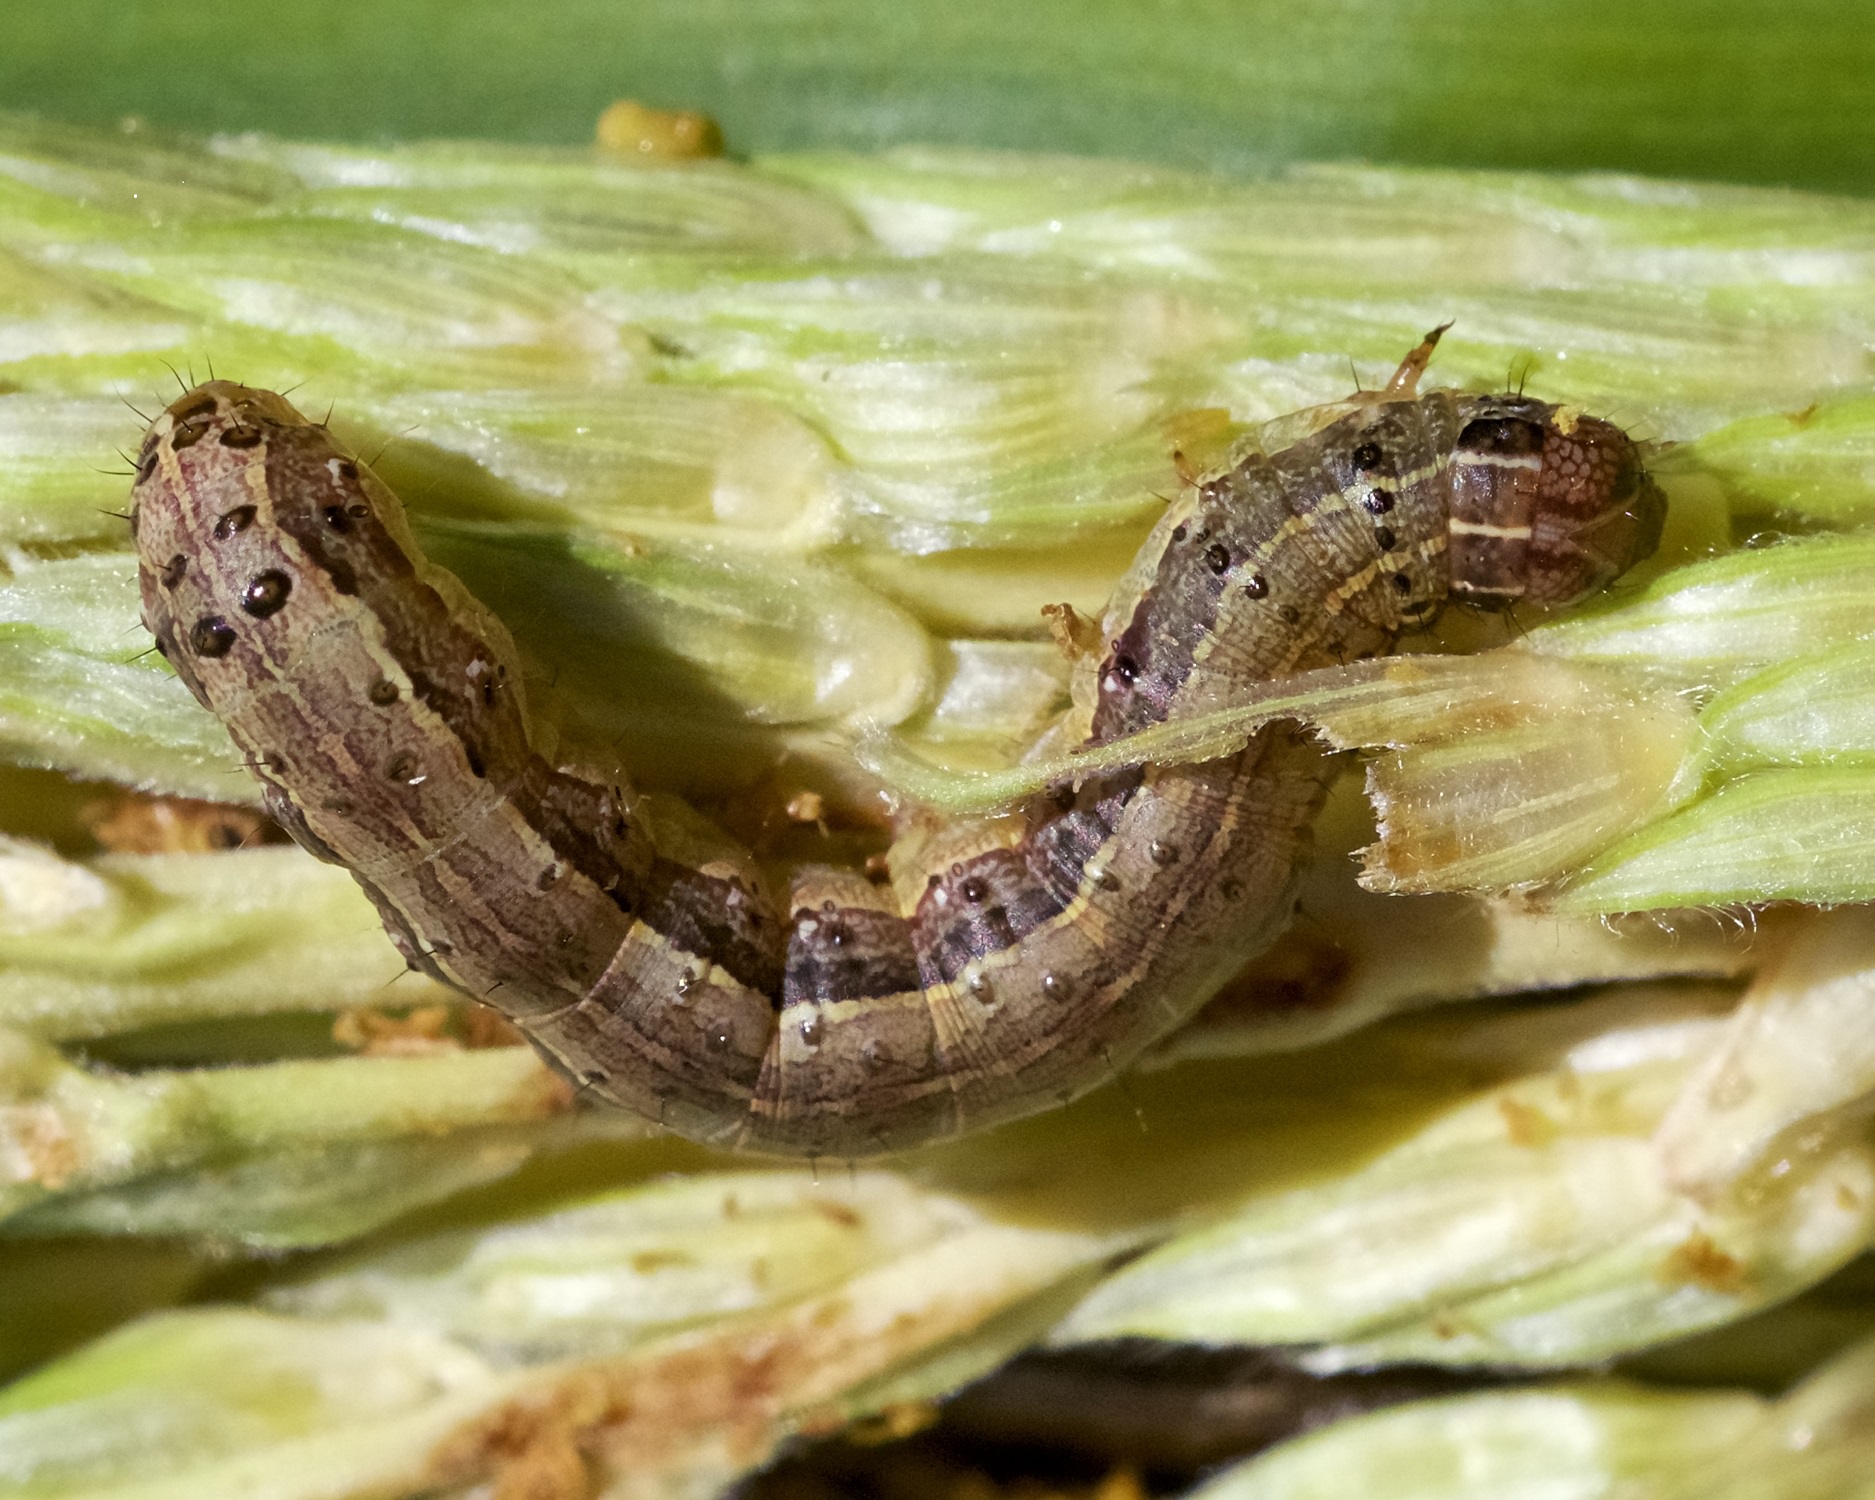 Fall armyworm outbreaks in pastures and hay fields by Dr. Mario A. Villarino, County Extension Agent for Agriculture and Natural Resources